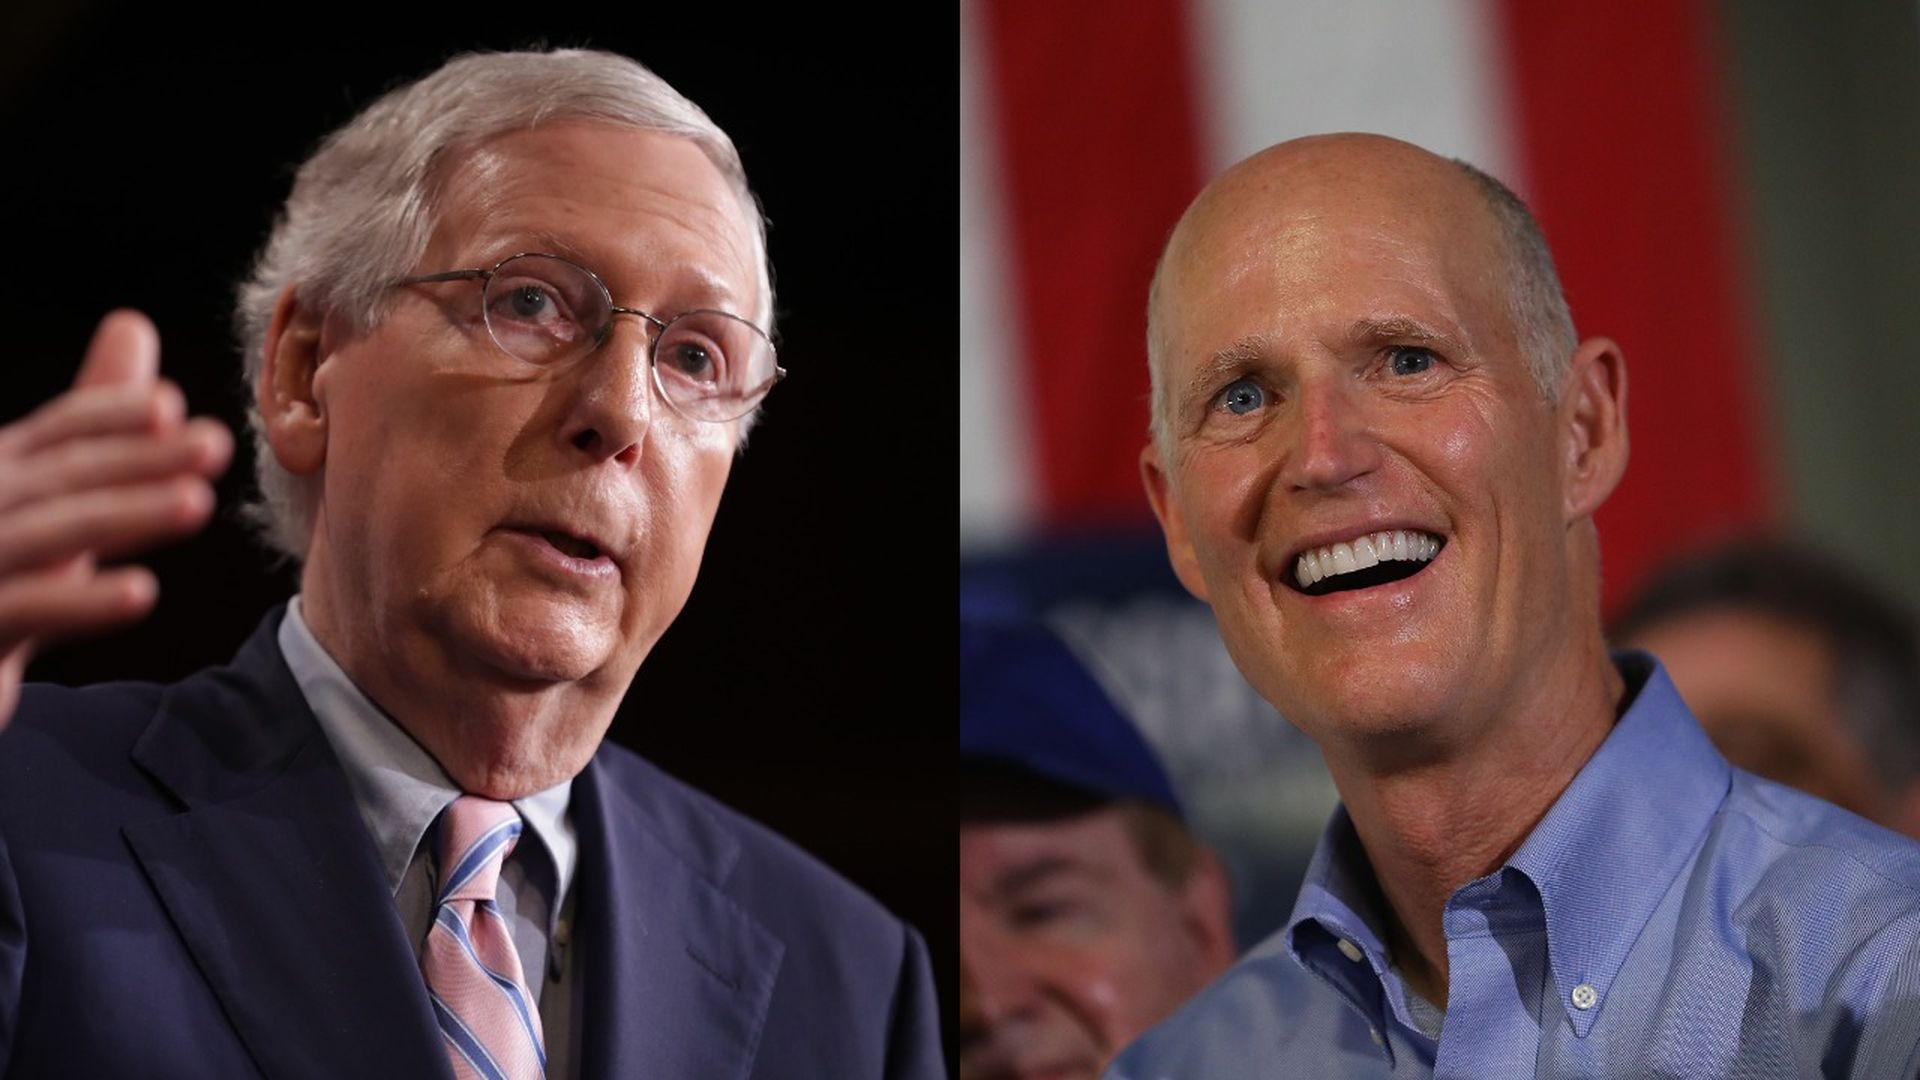 McConnell and Rick Scott